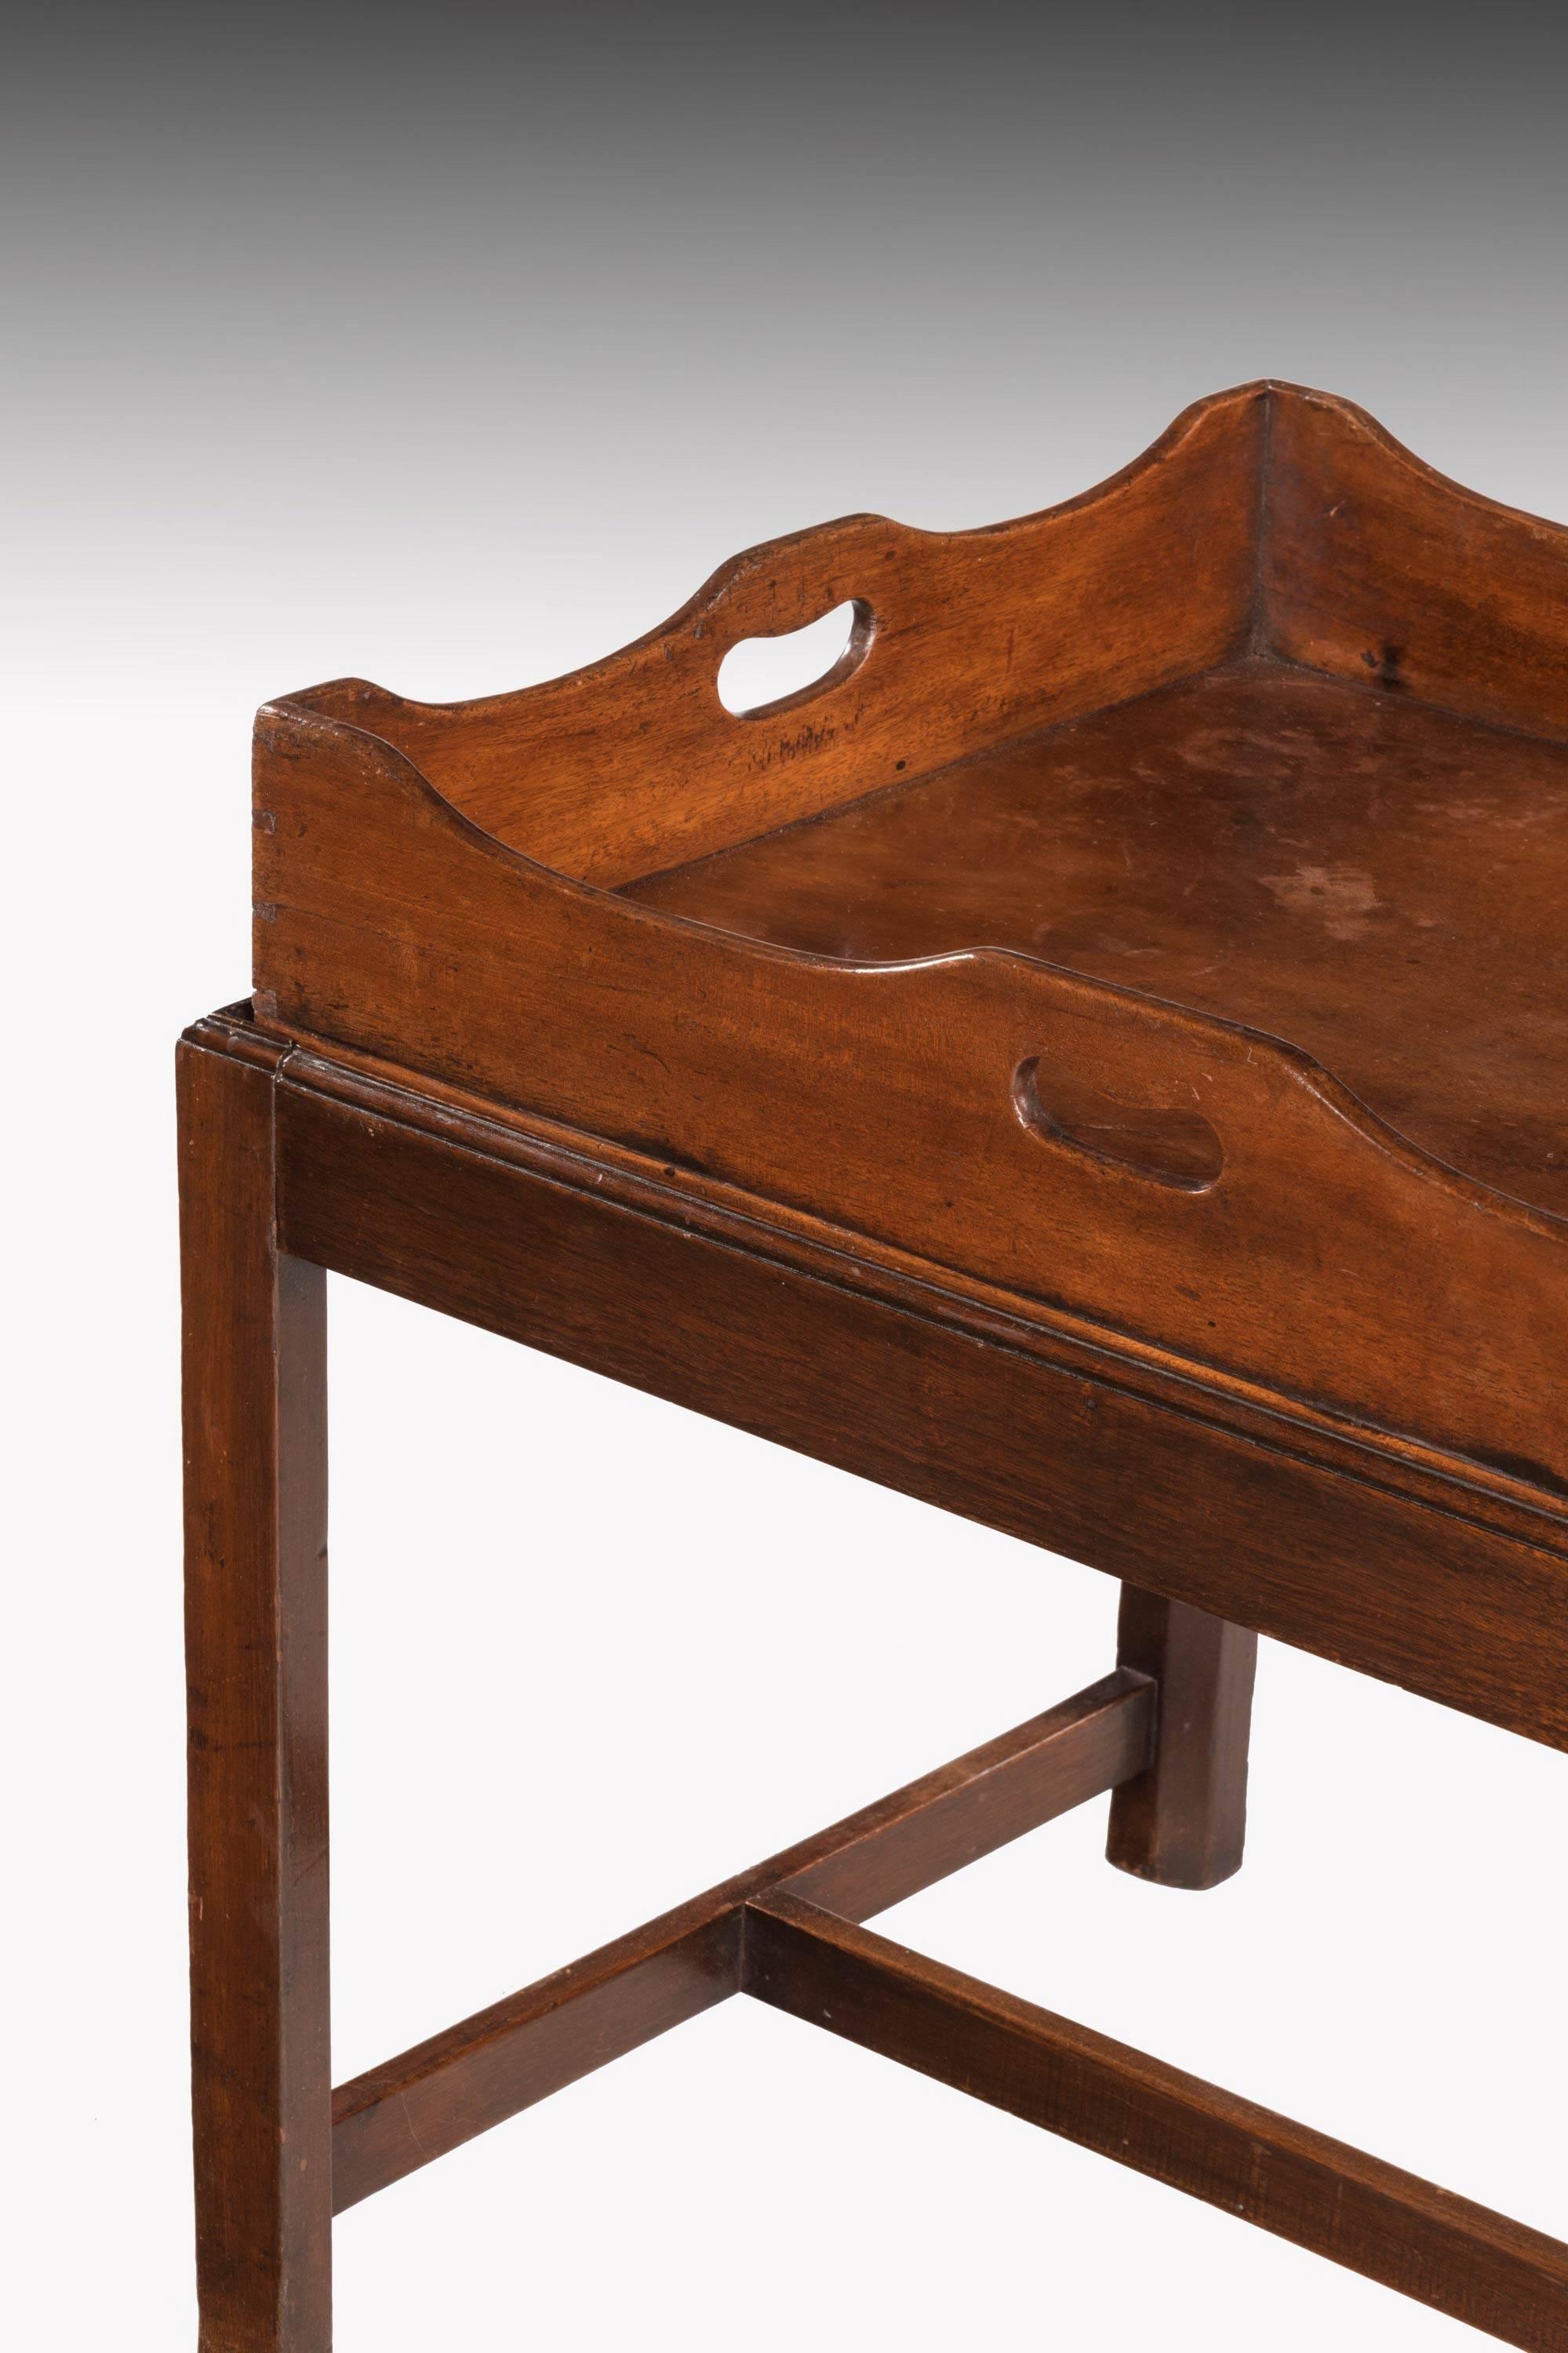 18th Century George III Period Mahogany Tray with a Shaped and Swept Border